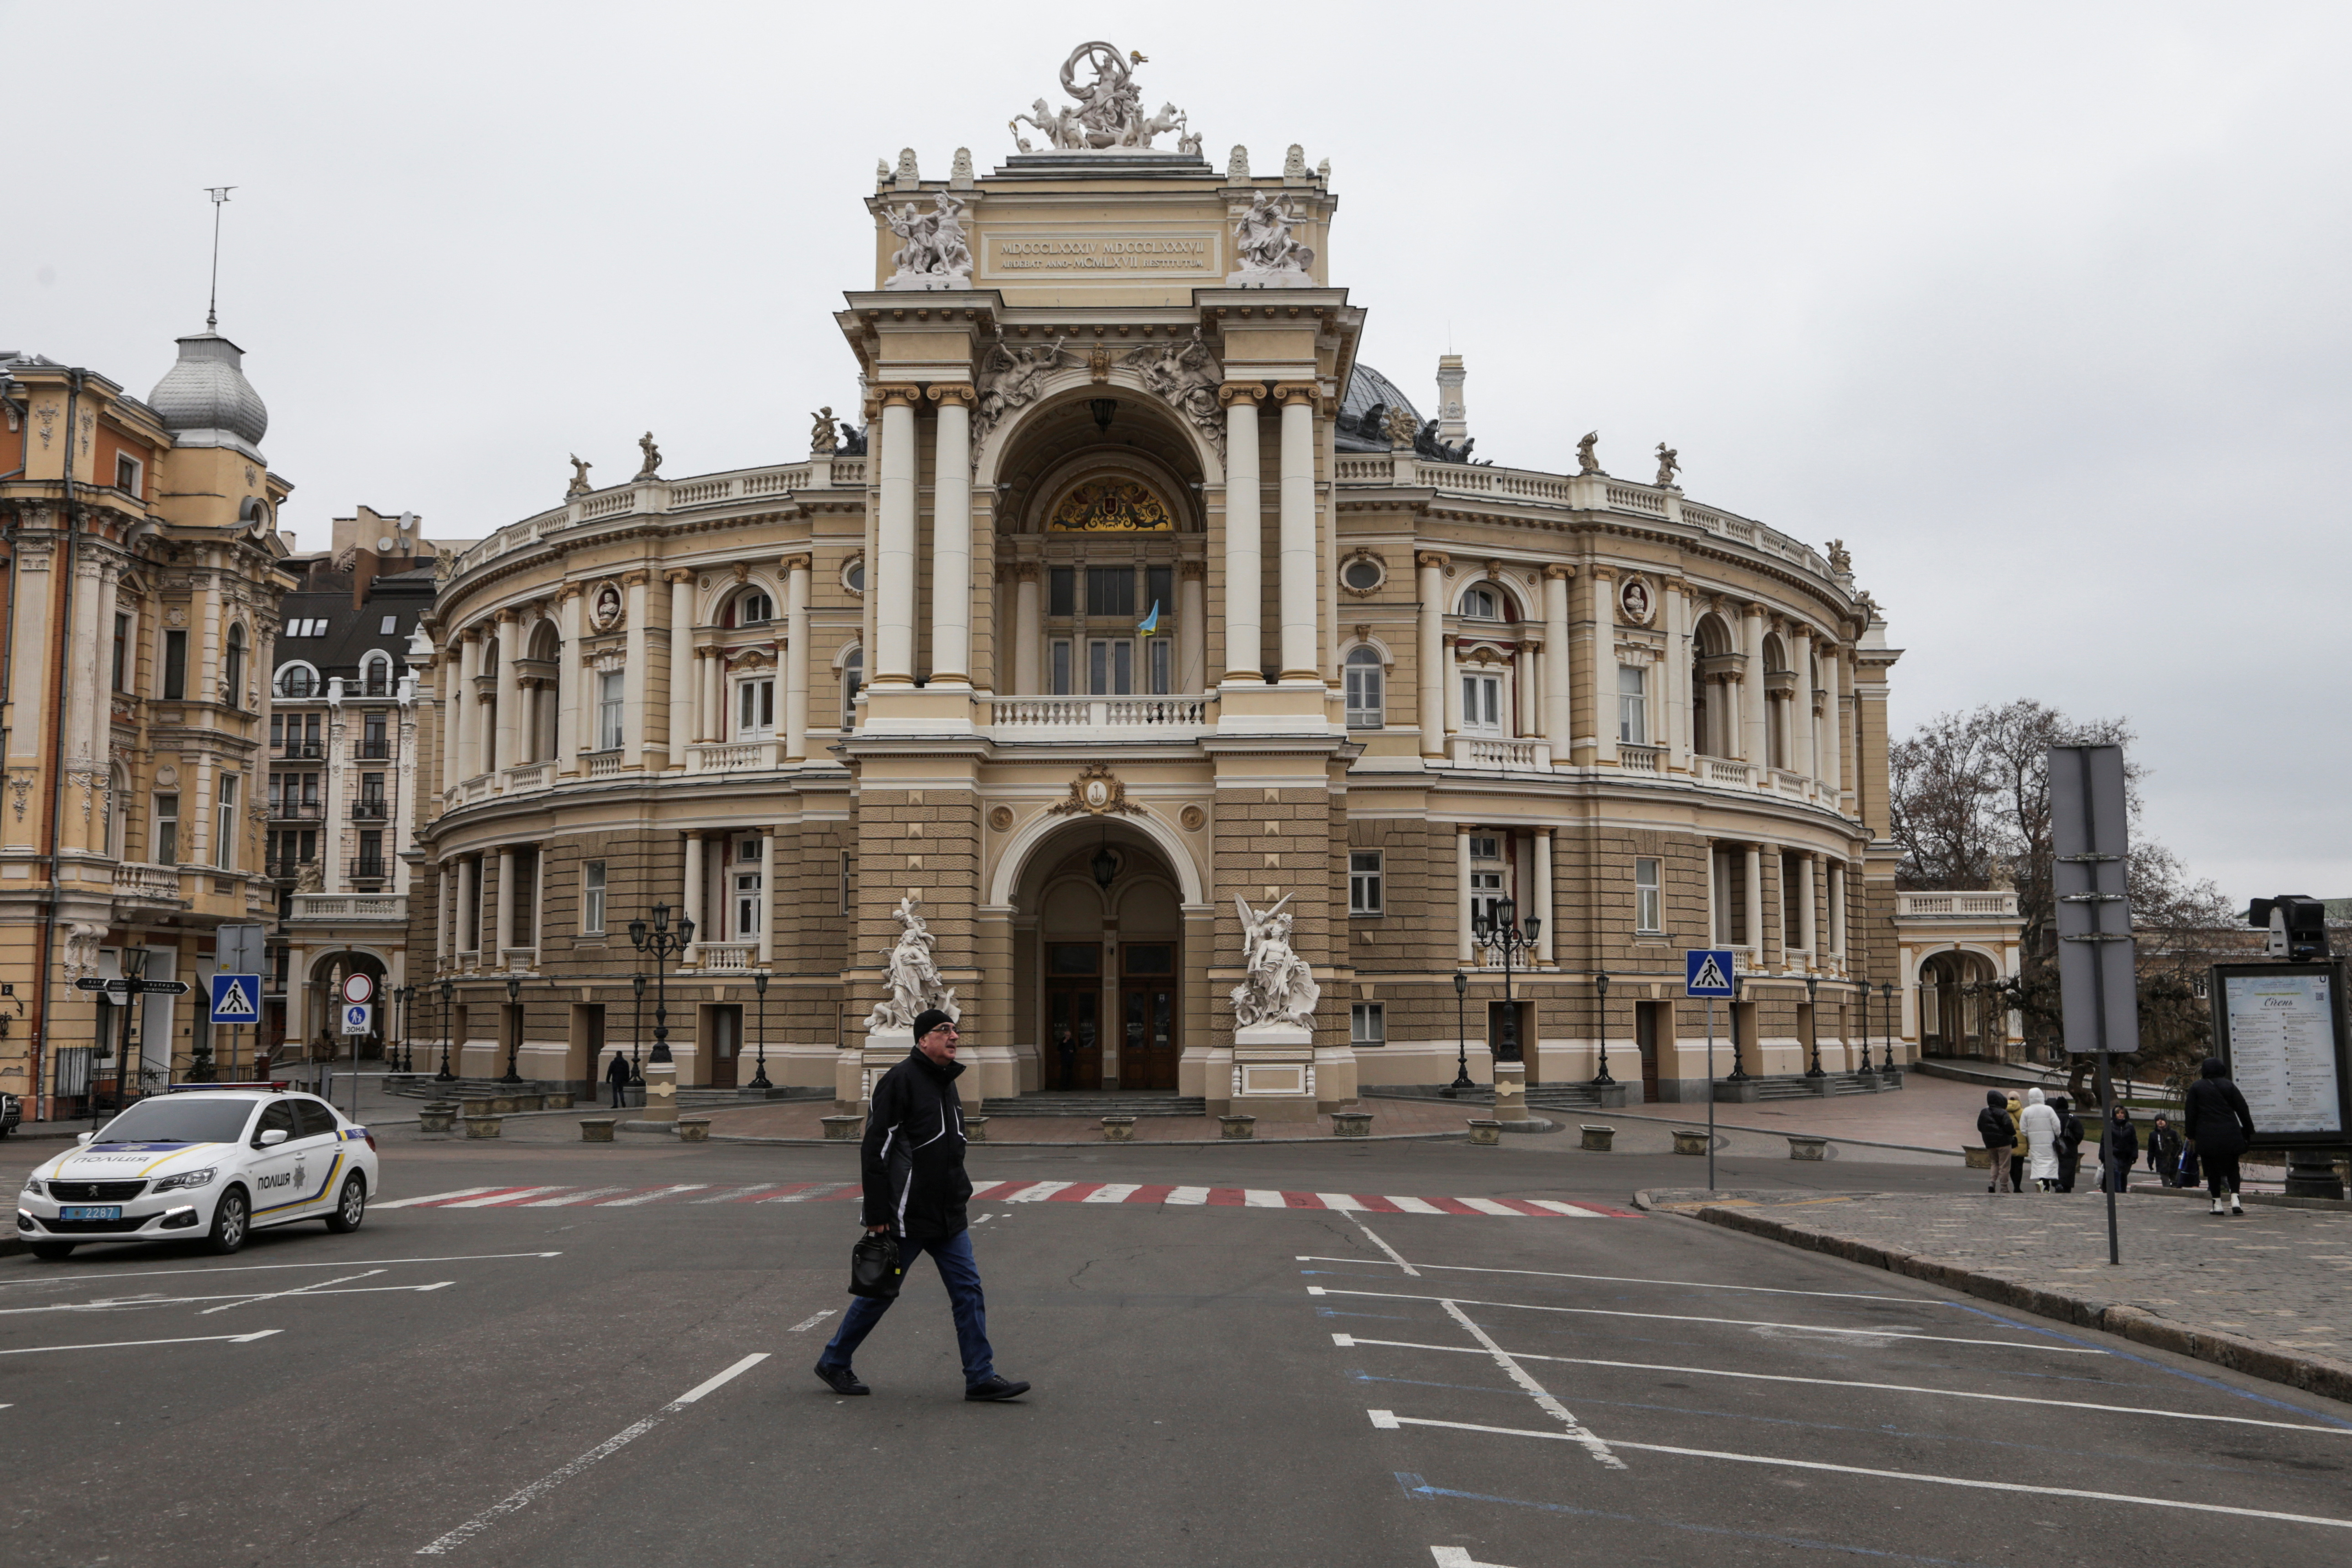 A man walks next to the Opera Theatre building in the city centre of Odesa